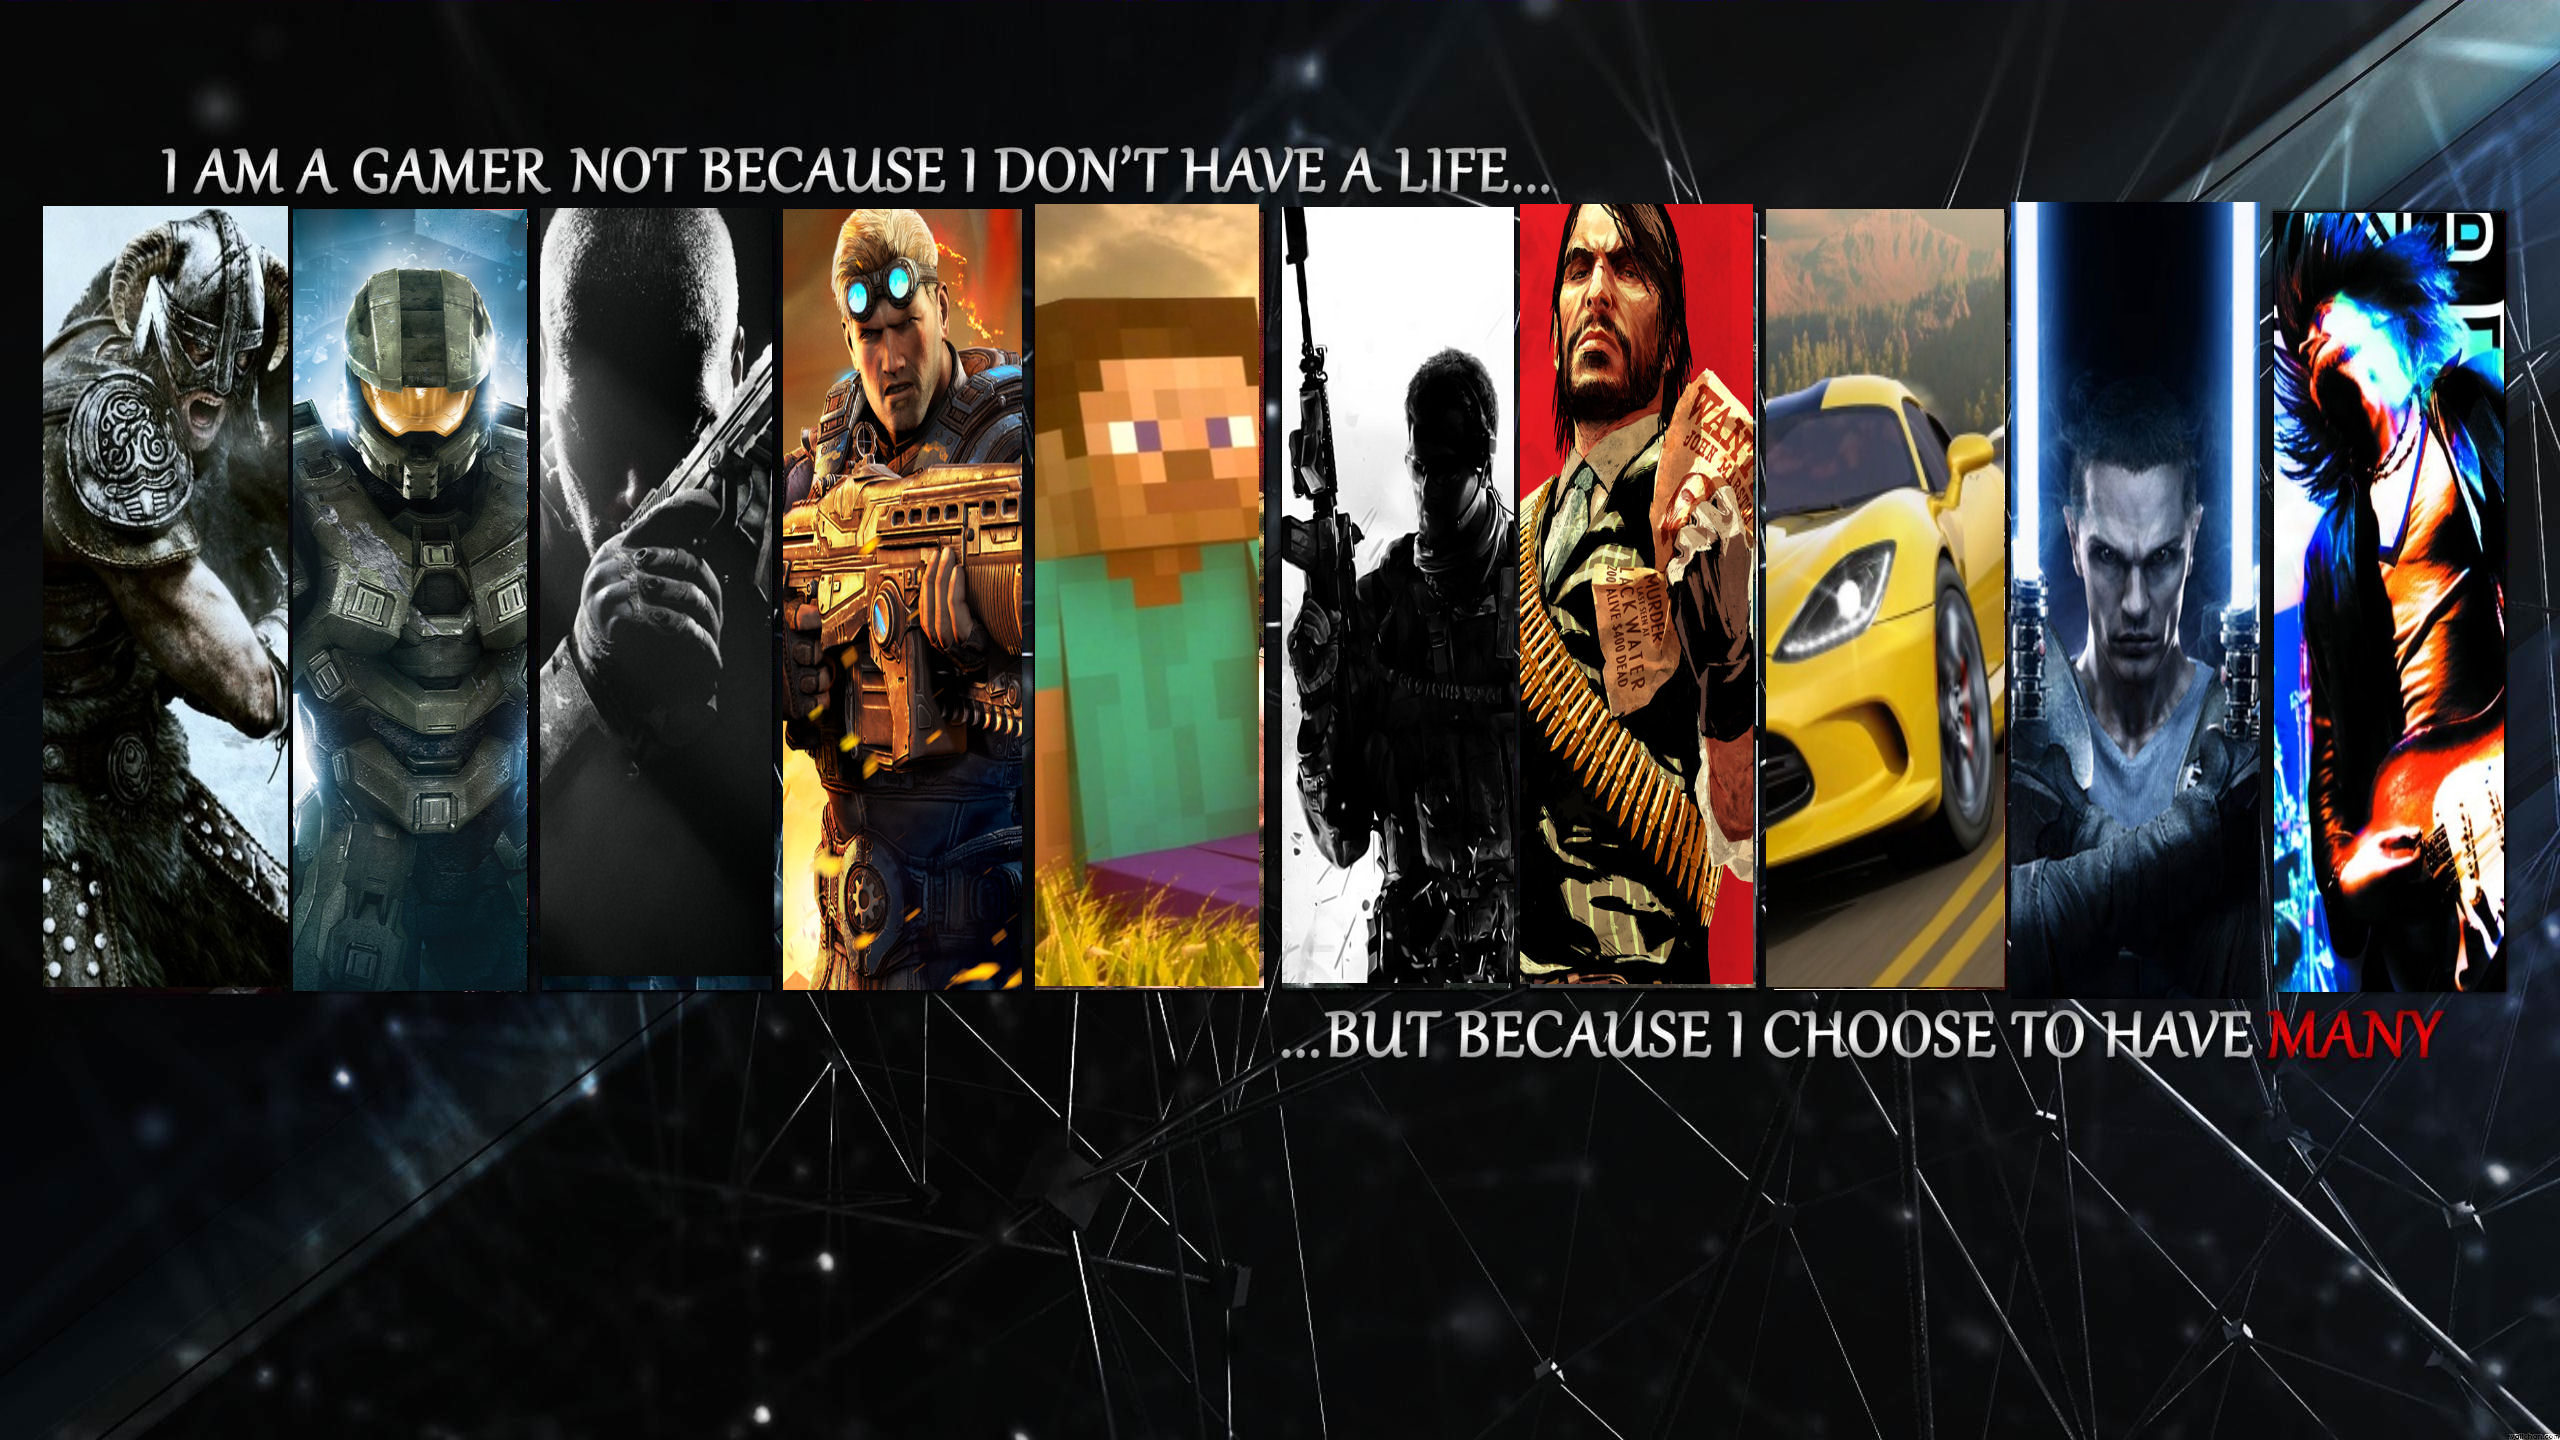 Redid A Gaming Wallpaper I Saw But With Different Games